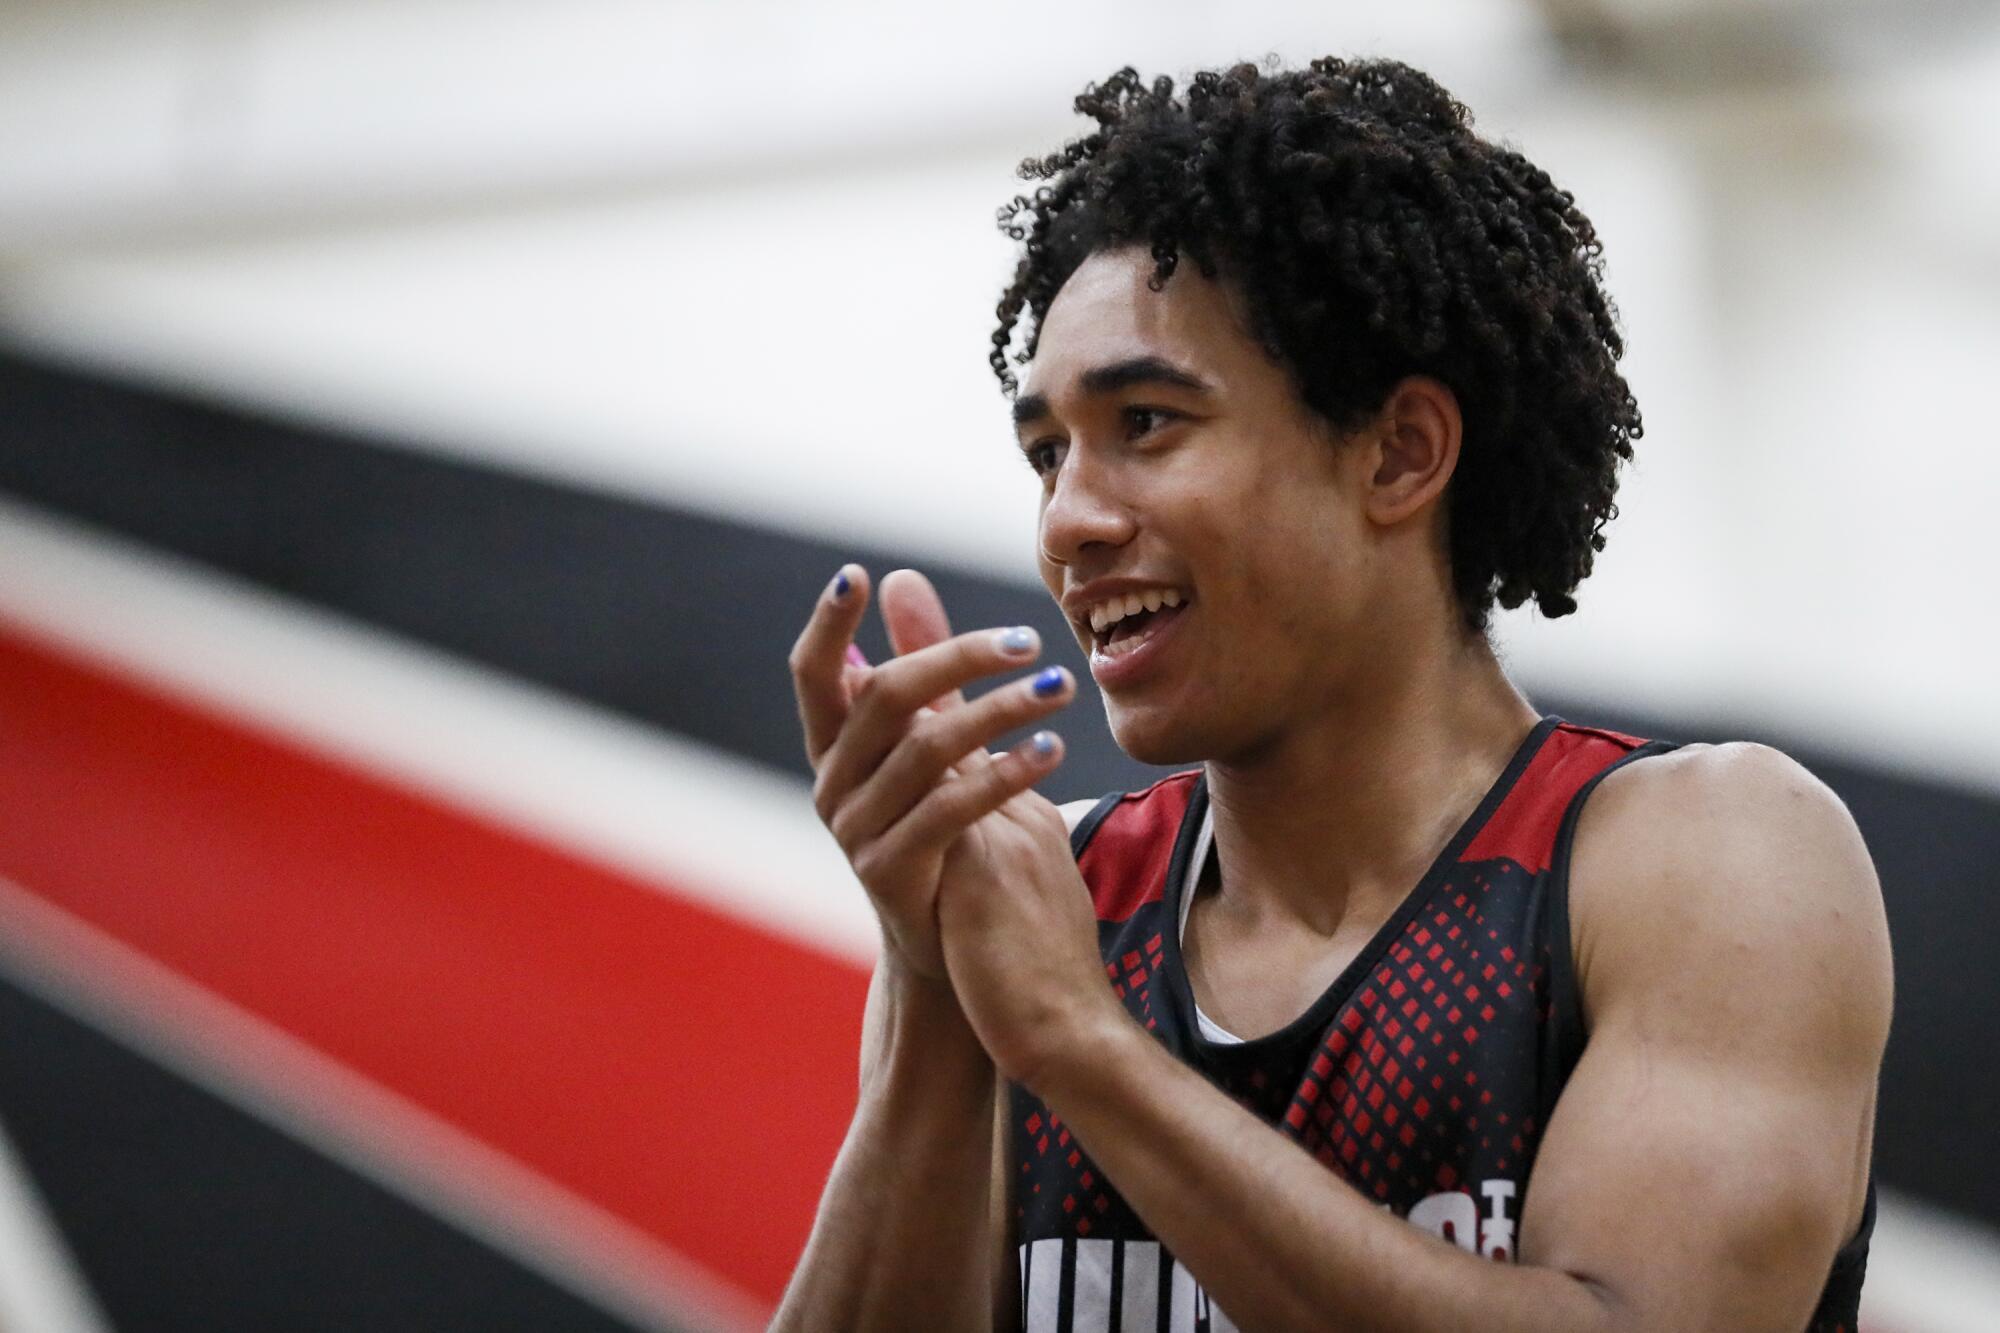 Centennial High guard Jared McCain claps his hand during practice.